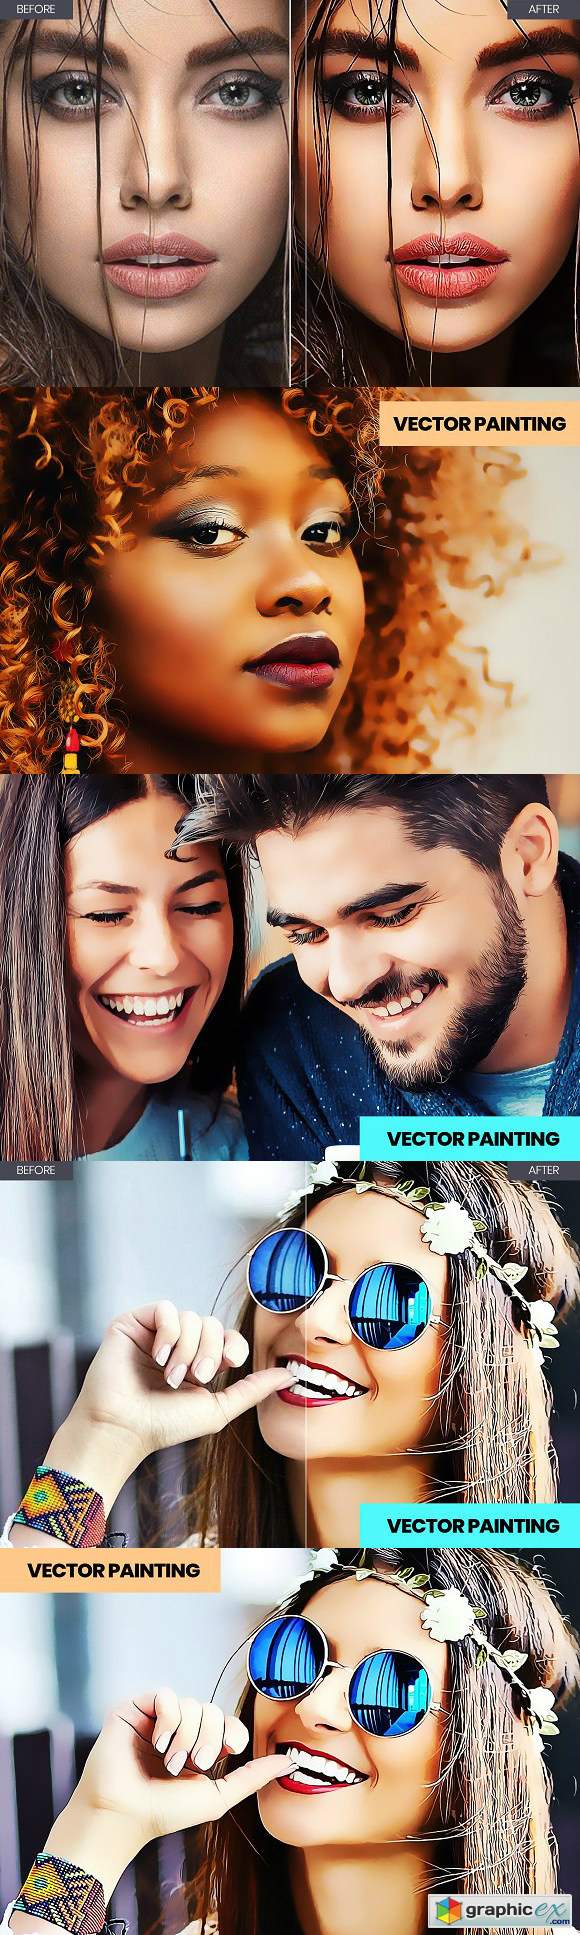 Vector Painting Photoshop Action 3142694